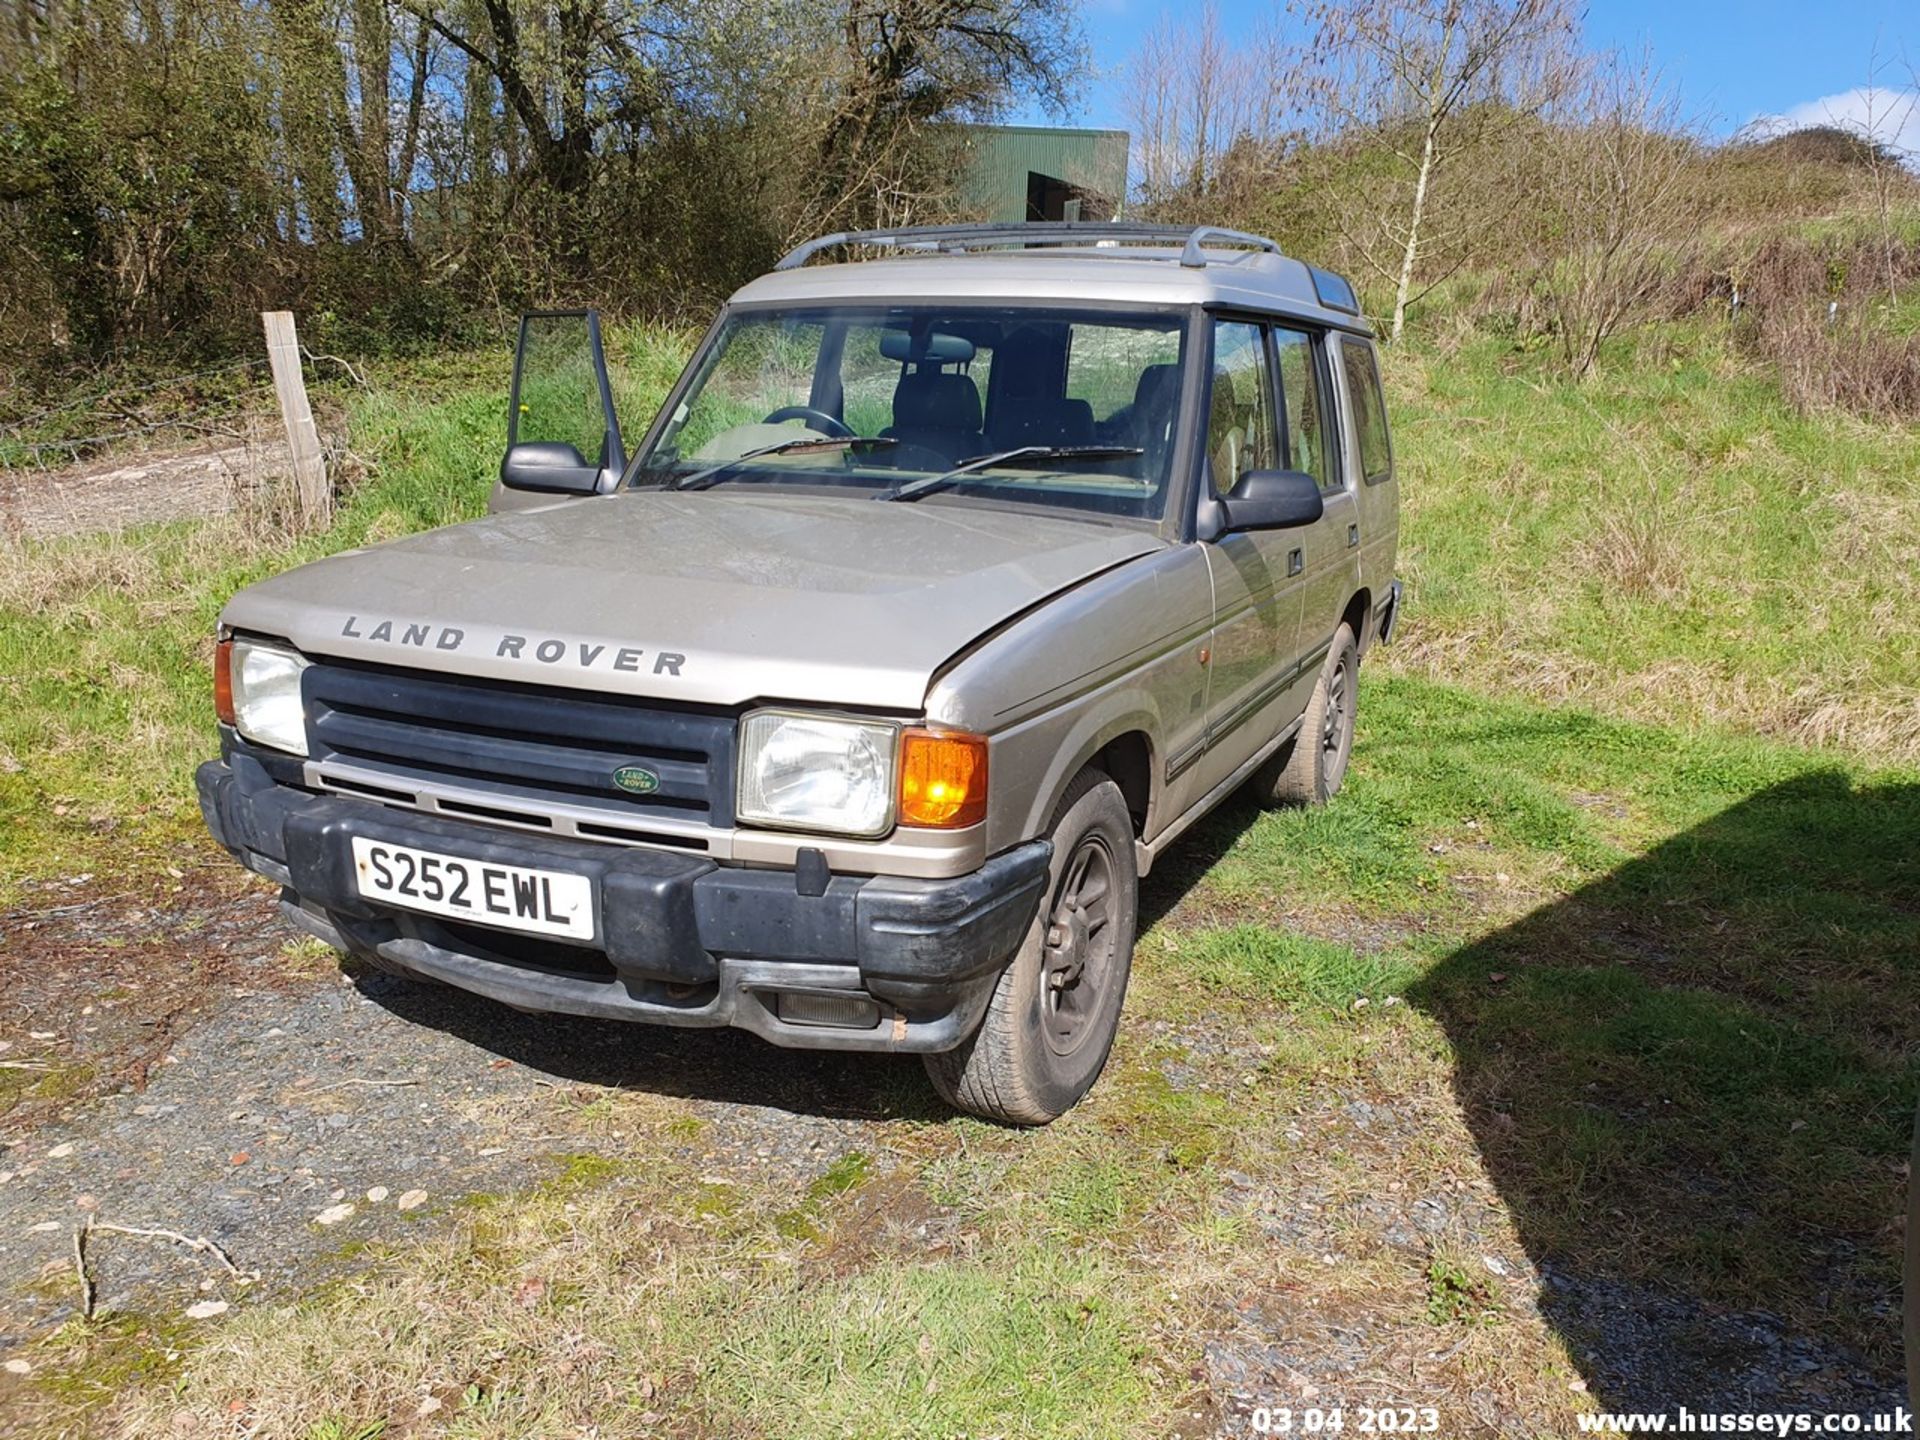 1998 LAND ROVER DISCOVERY ES TDI - 2495cc 5dr Estate (Gold) - Image 31 of 31